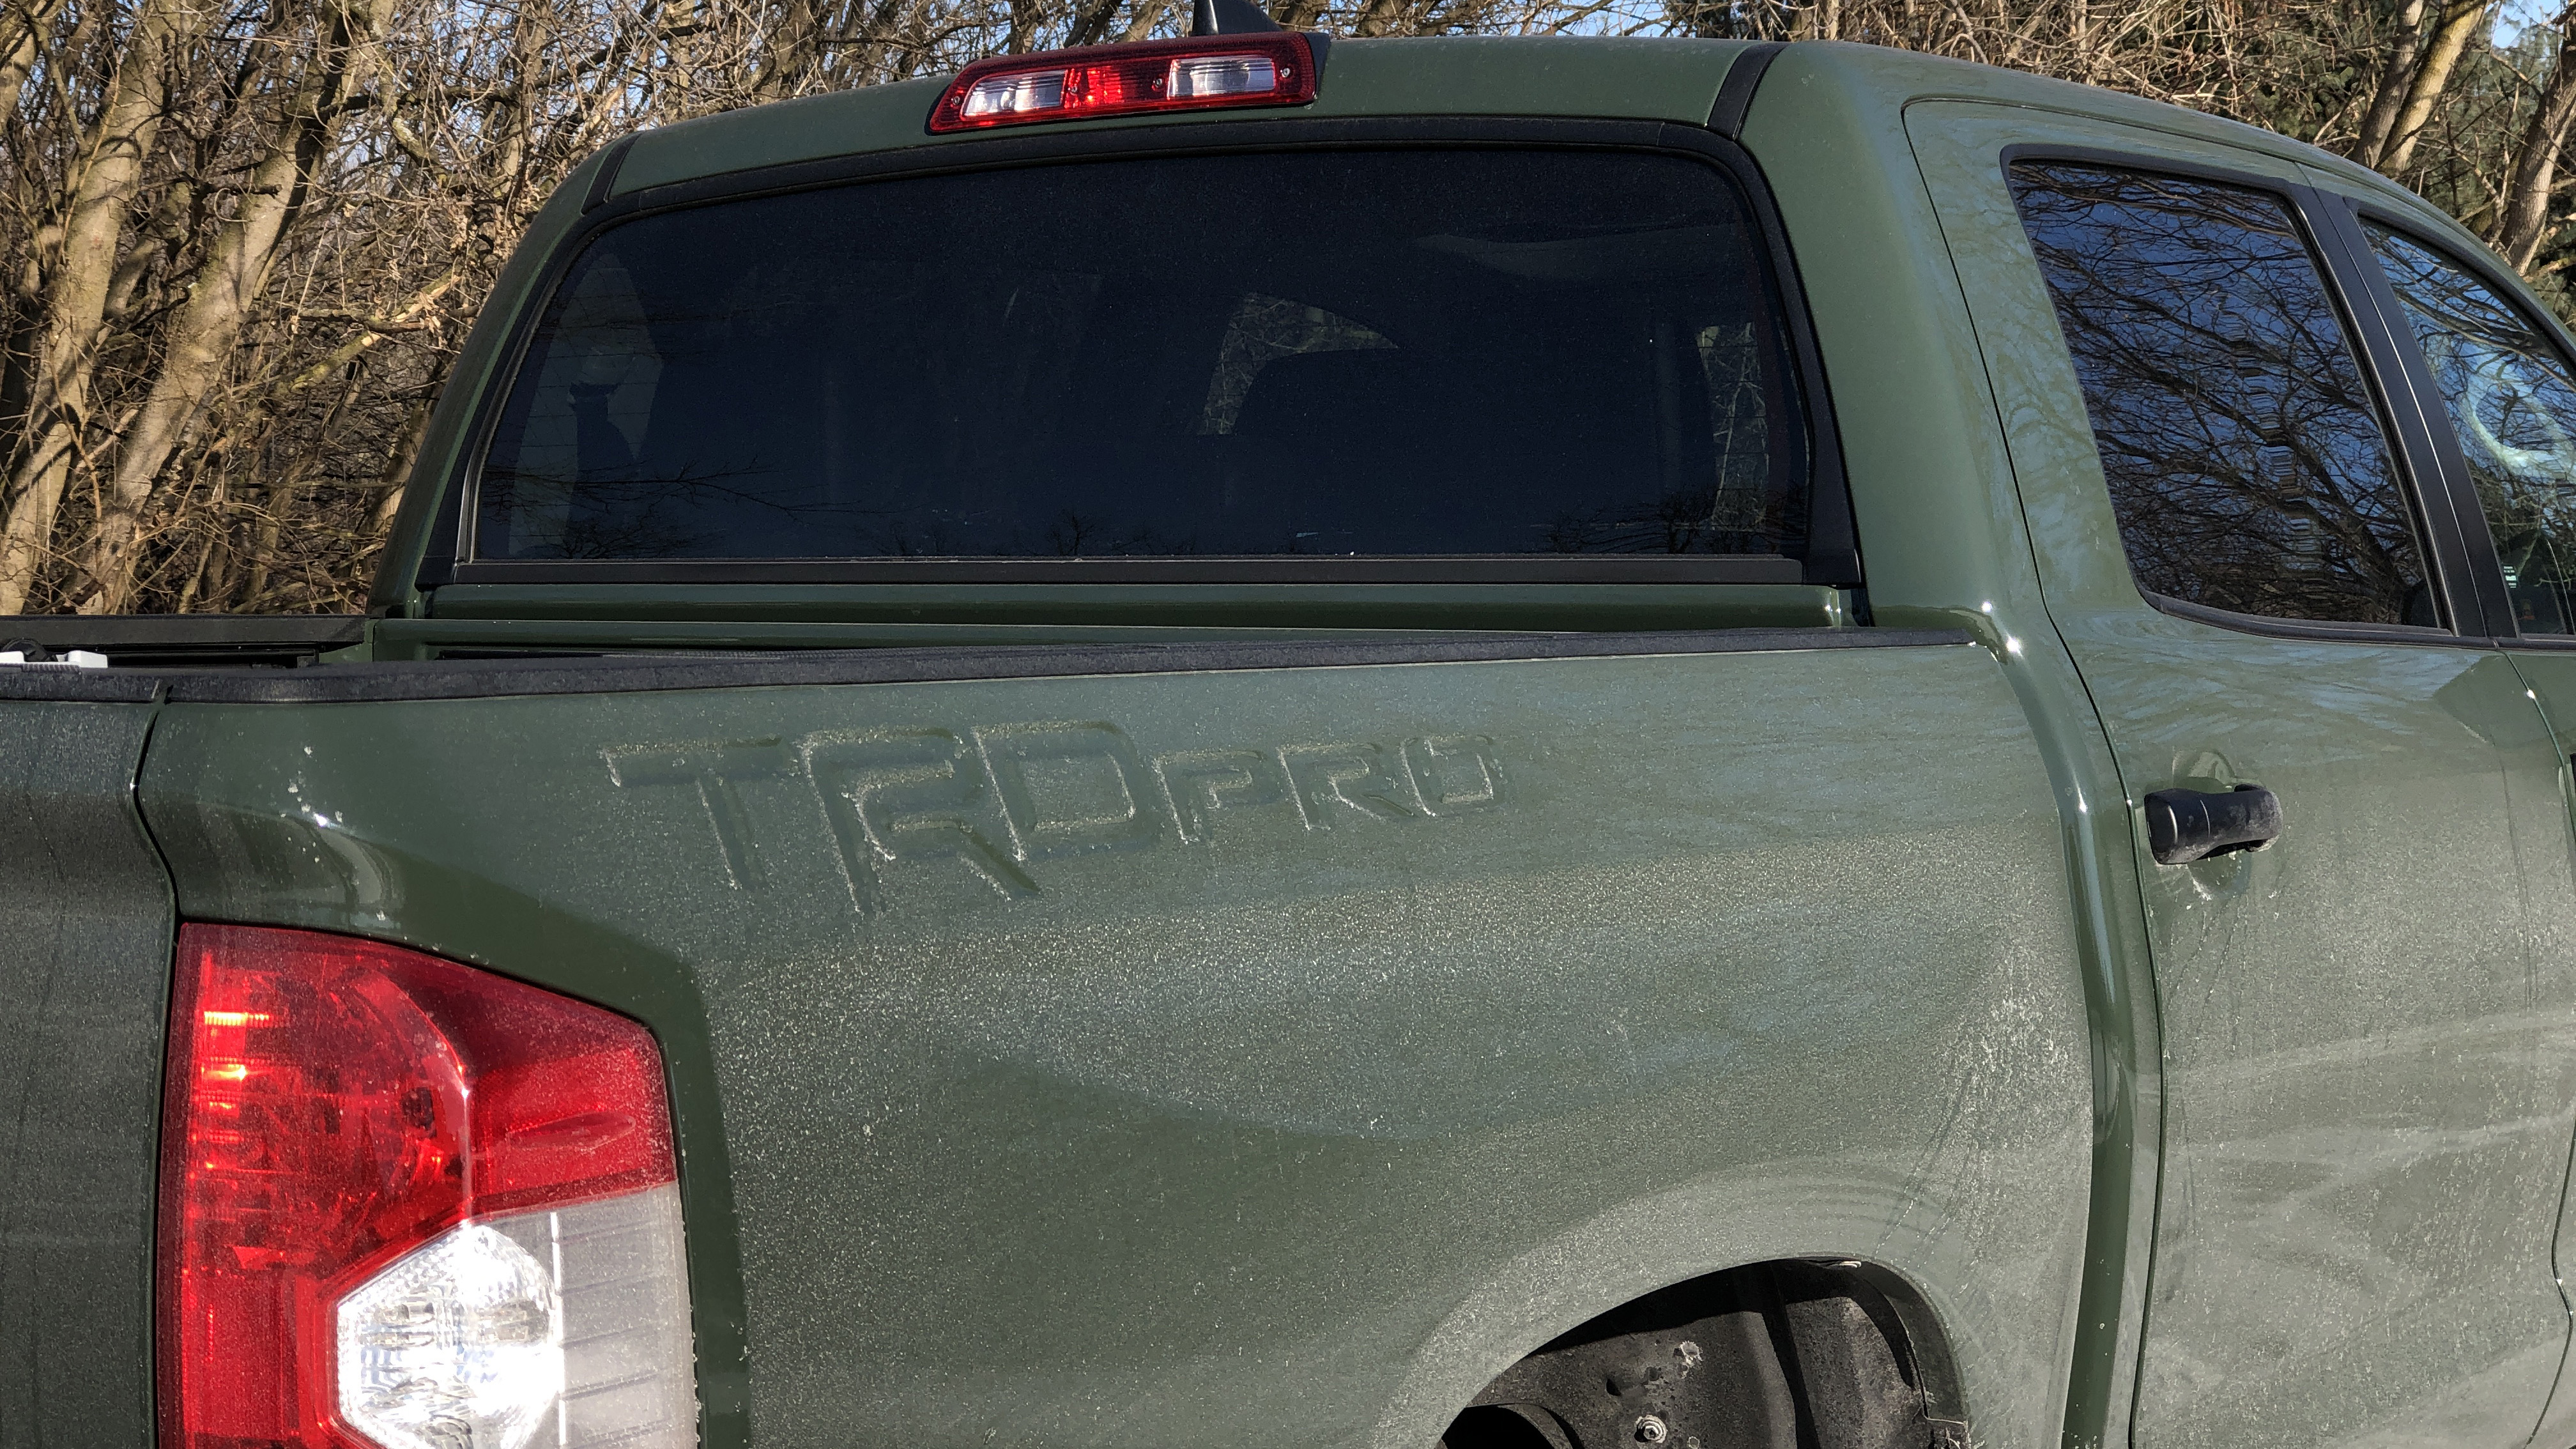 2020 Toyota Tundra TRD Pro Drivers' Notes | Suspension, engine